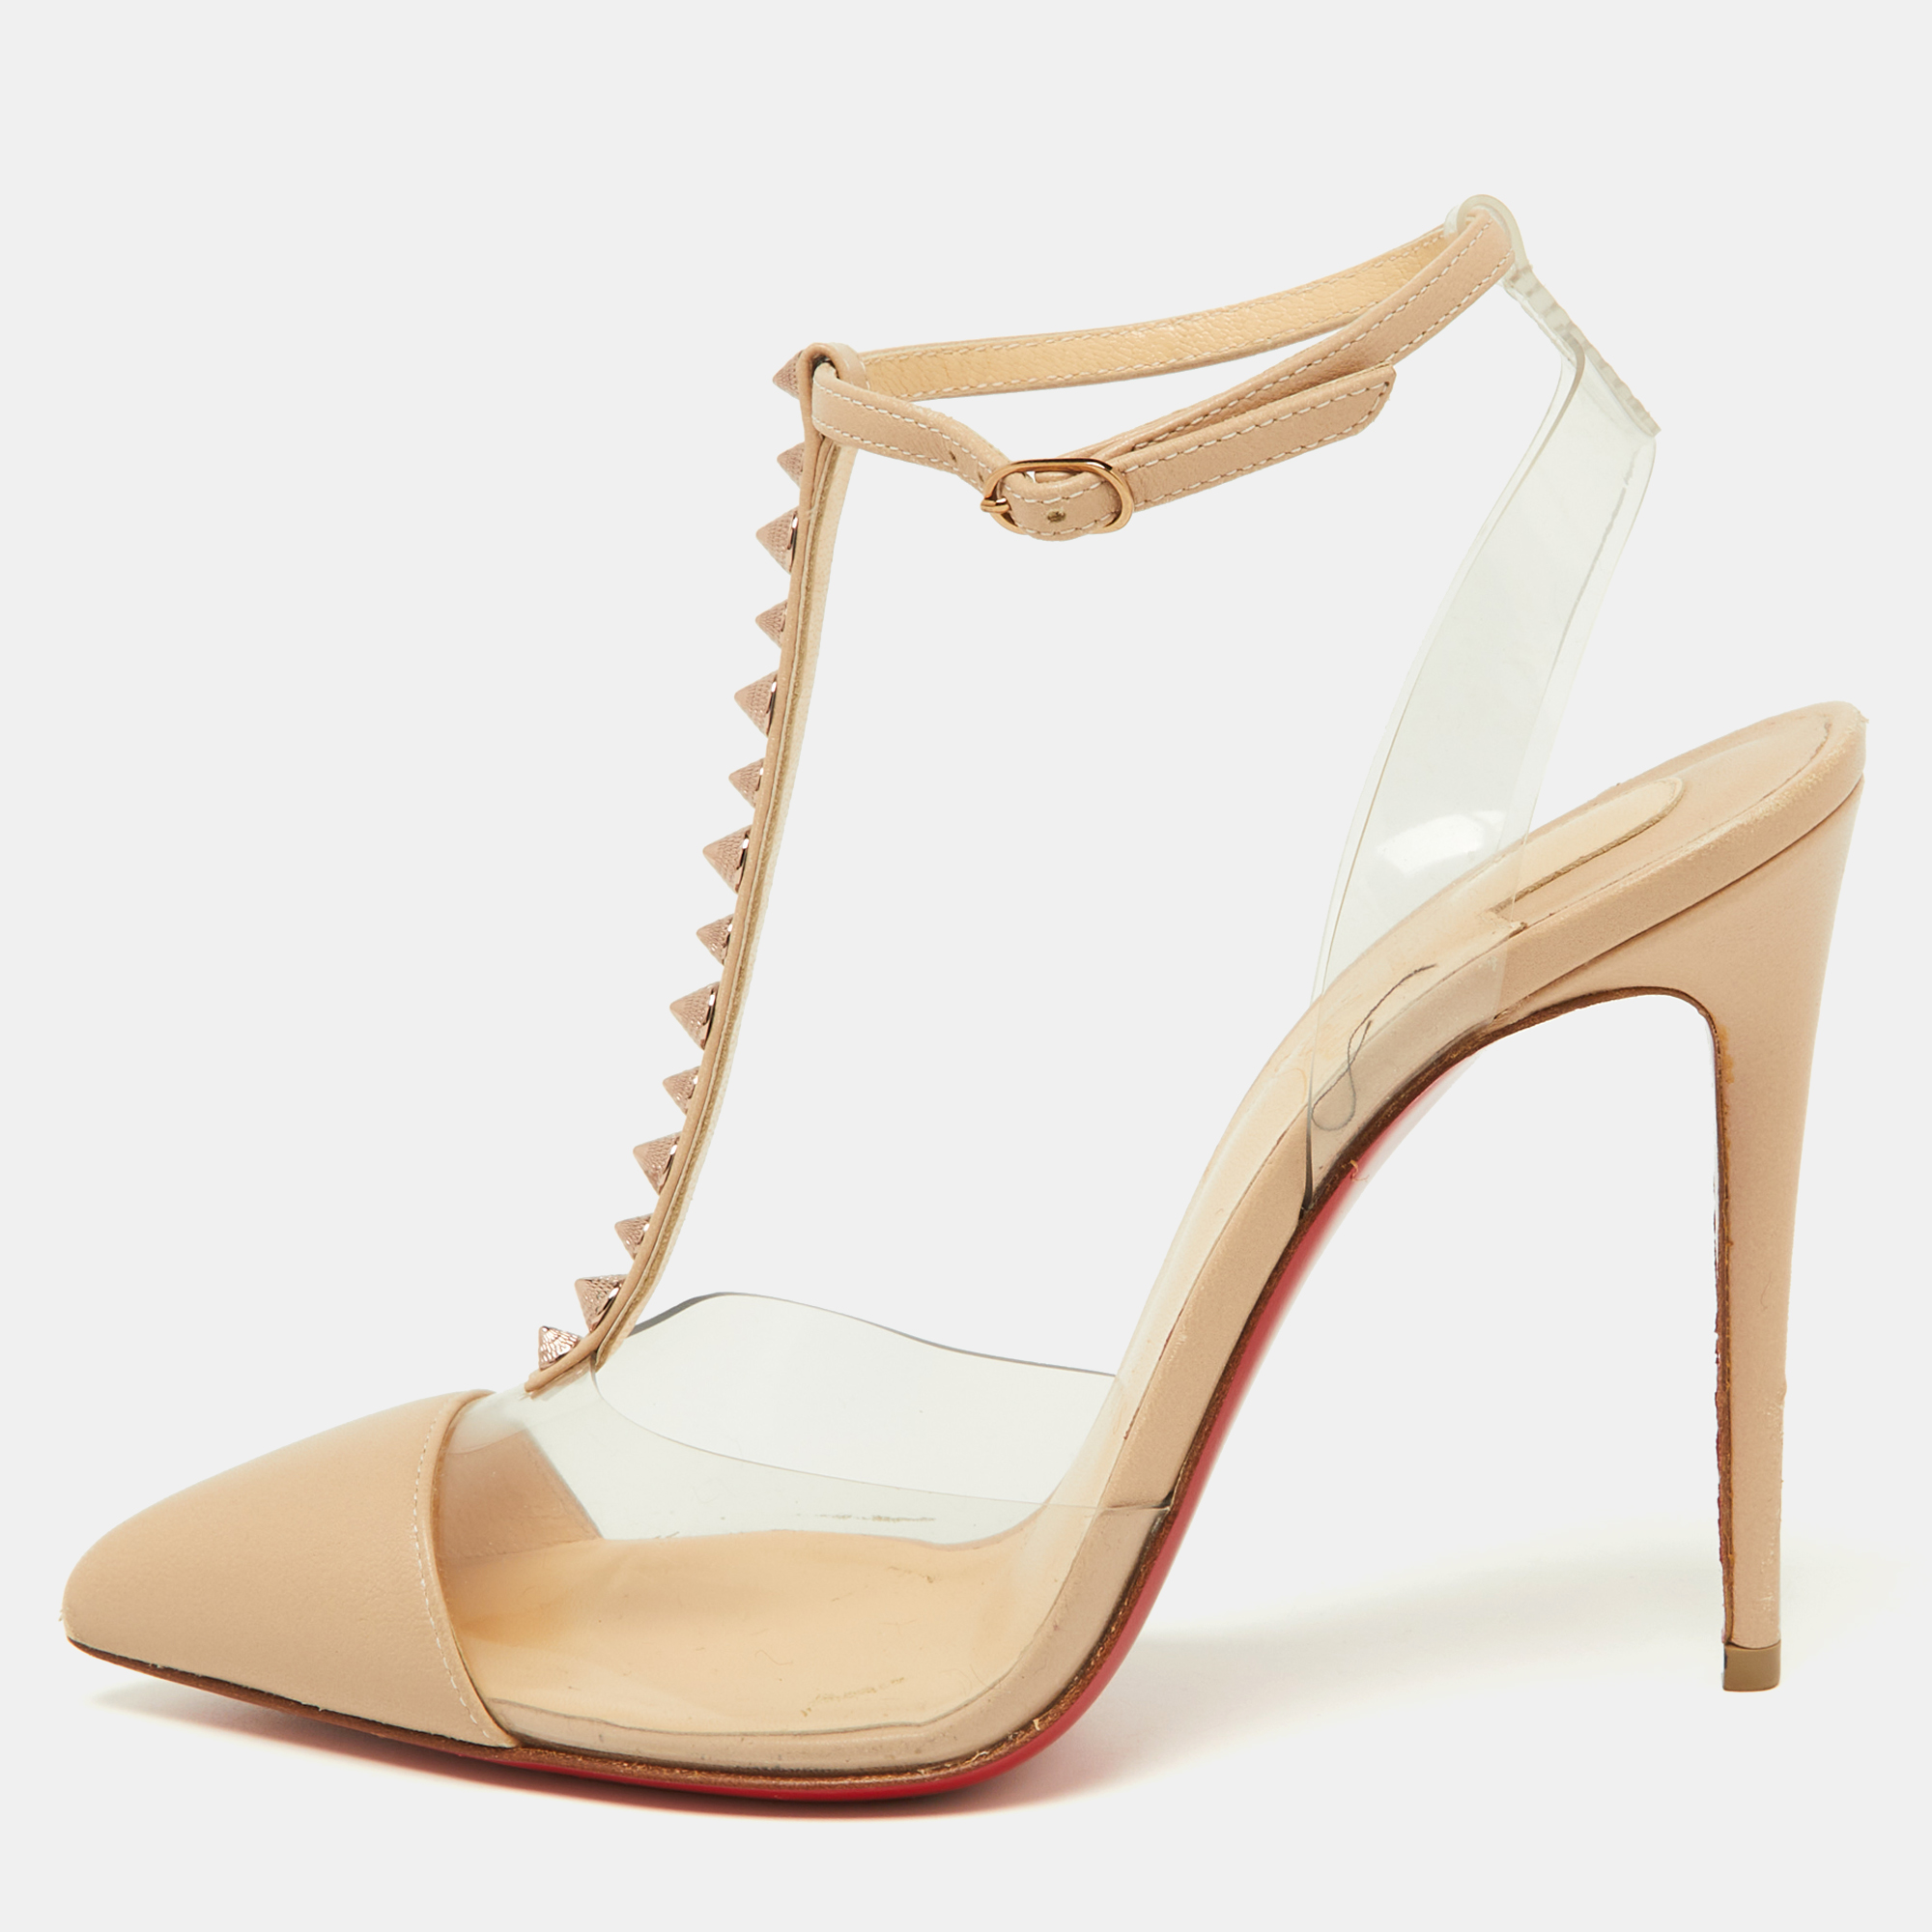 Christian louboutin beige leather and pvc nosy t-strap slingback pumps size 36